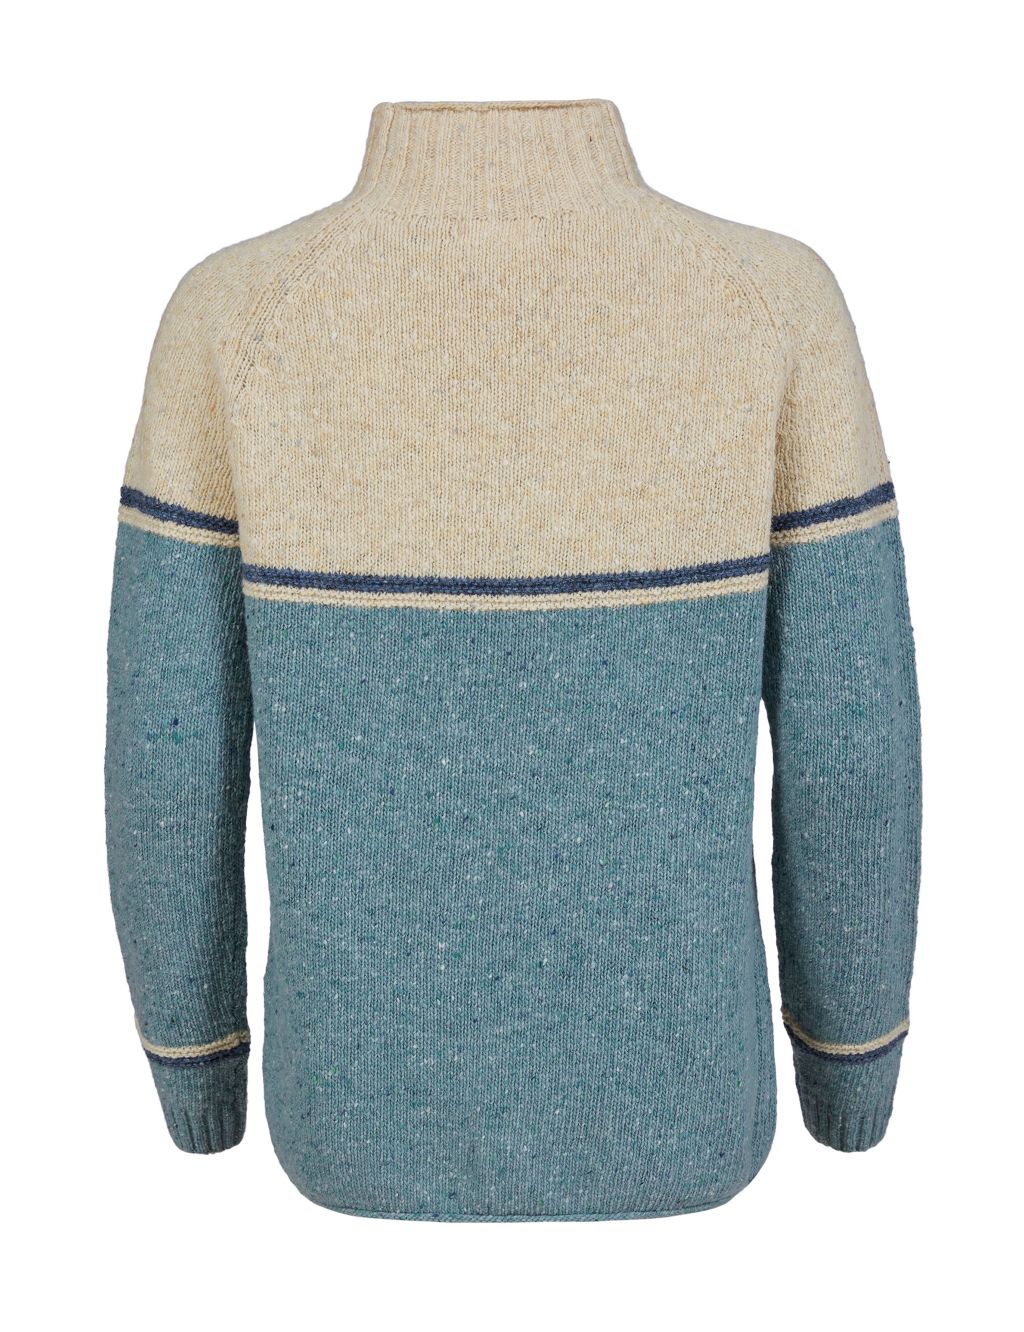 Pure Lambswool Colour Block Jumper image 4